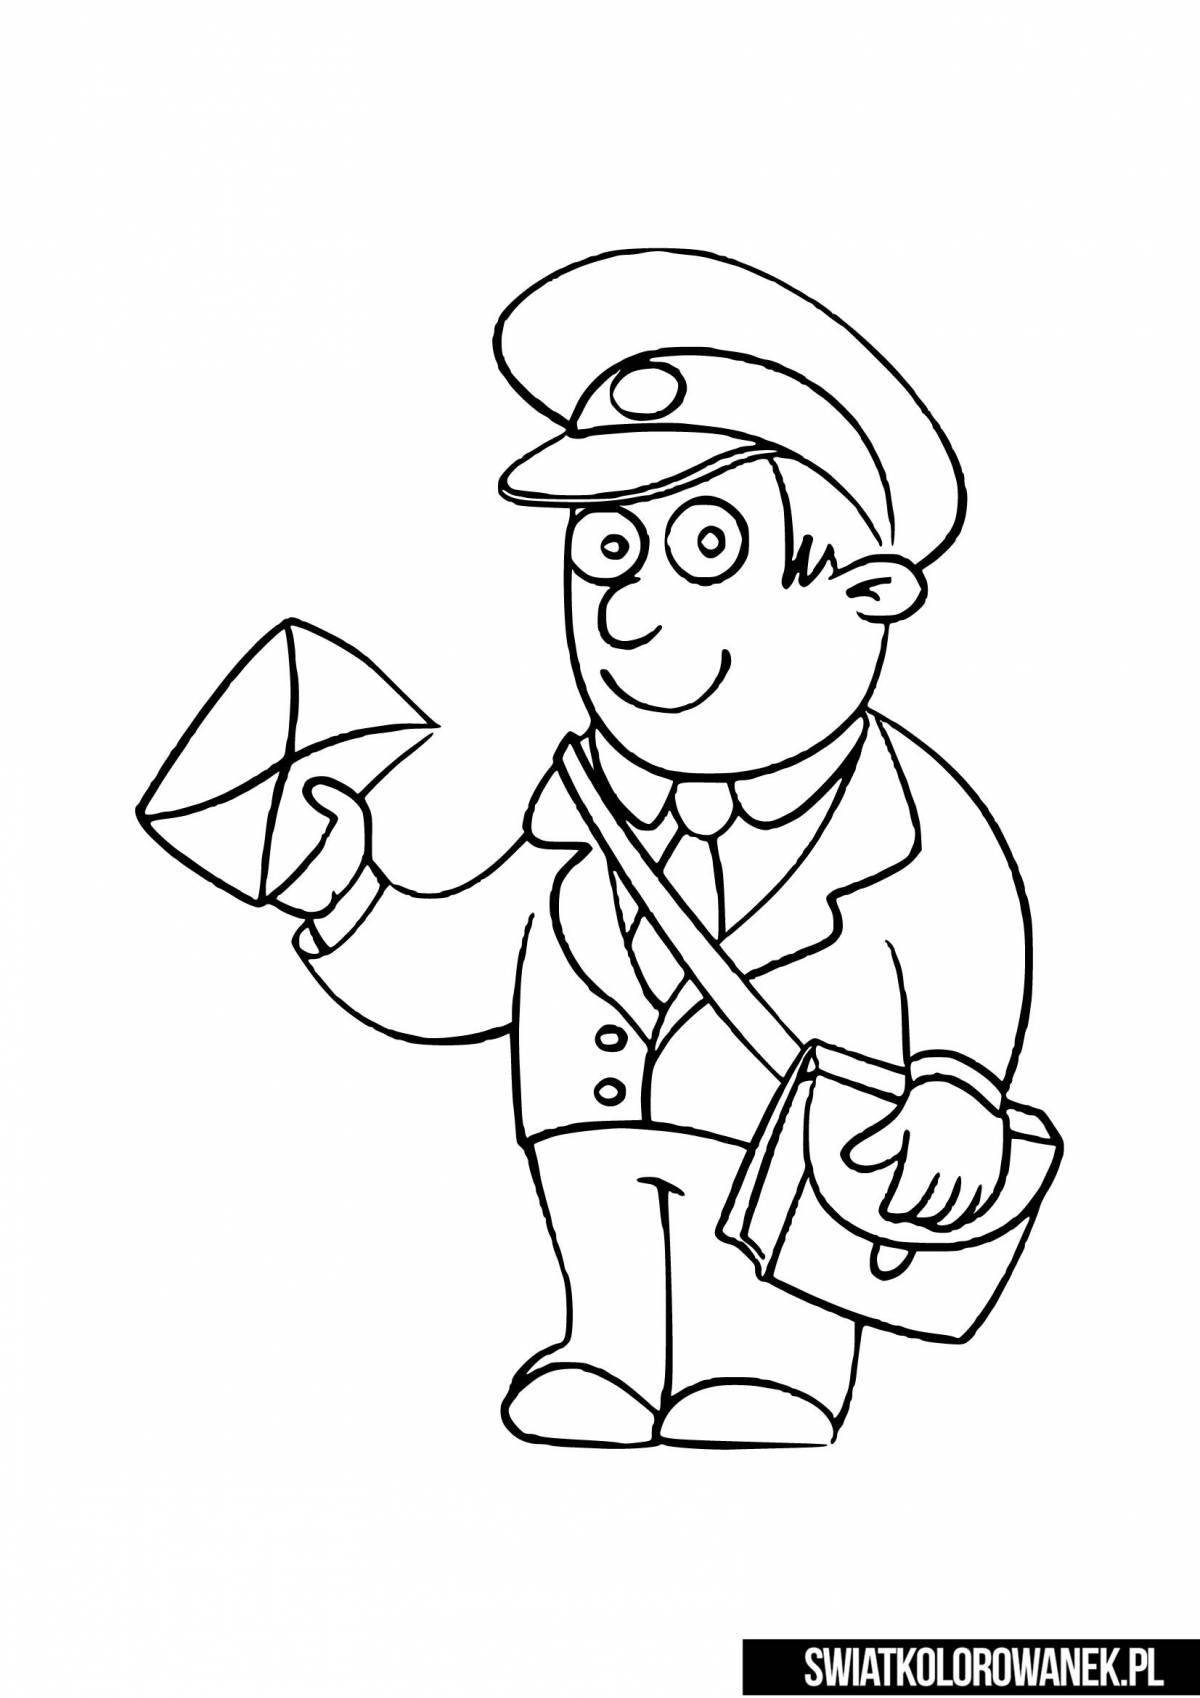 Funny Pechkin postman coloring for babies